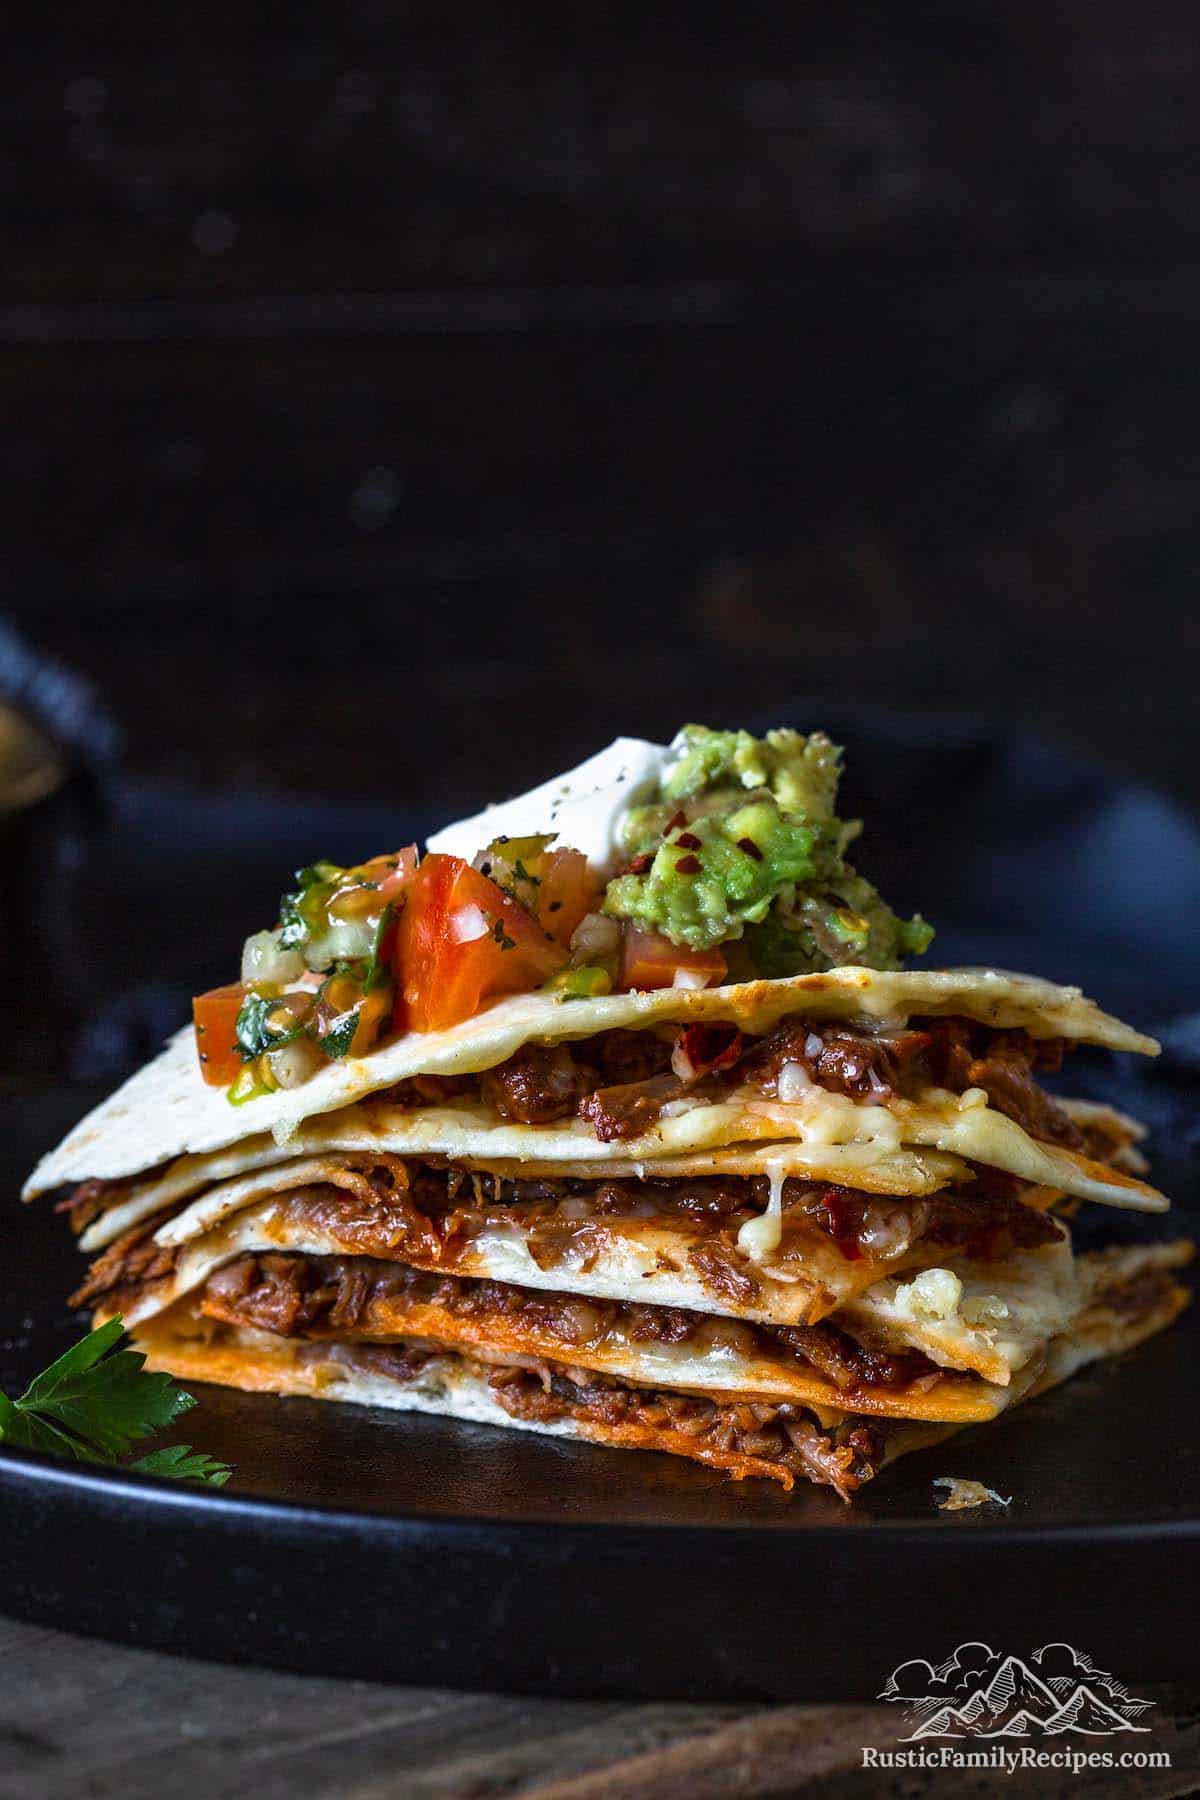 Stack of quesadilla wedges where you can see the birria meat, topped with salsa, guacamole and sour cream.